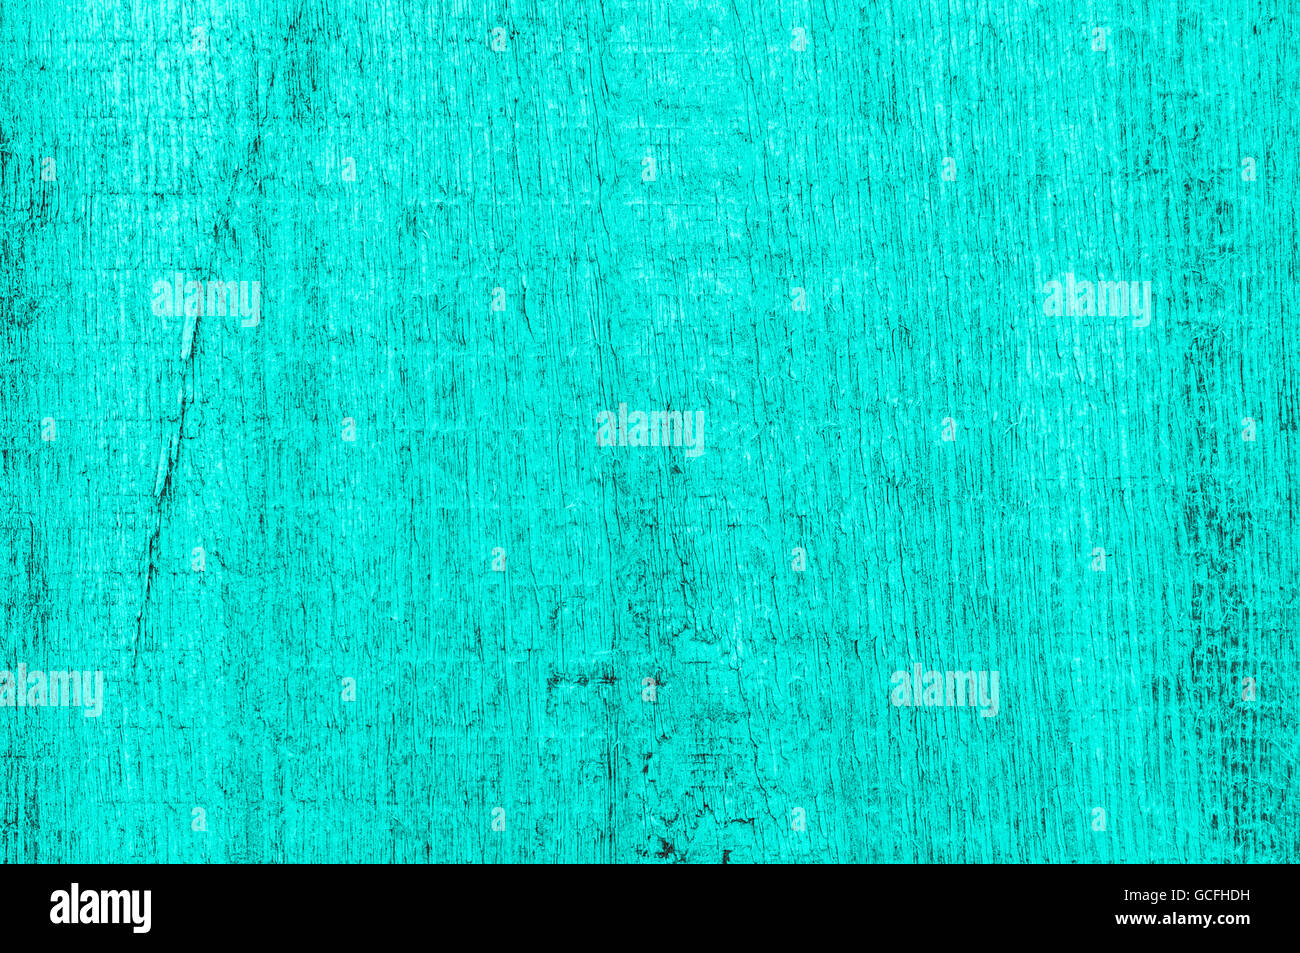 Rough grainy wood mainly turquoise grayish grayscale colors Stock Photo